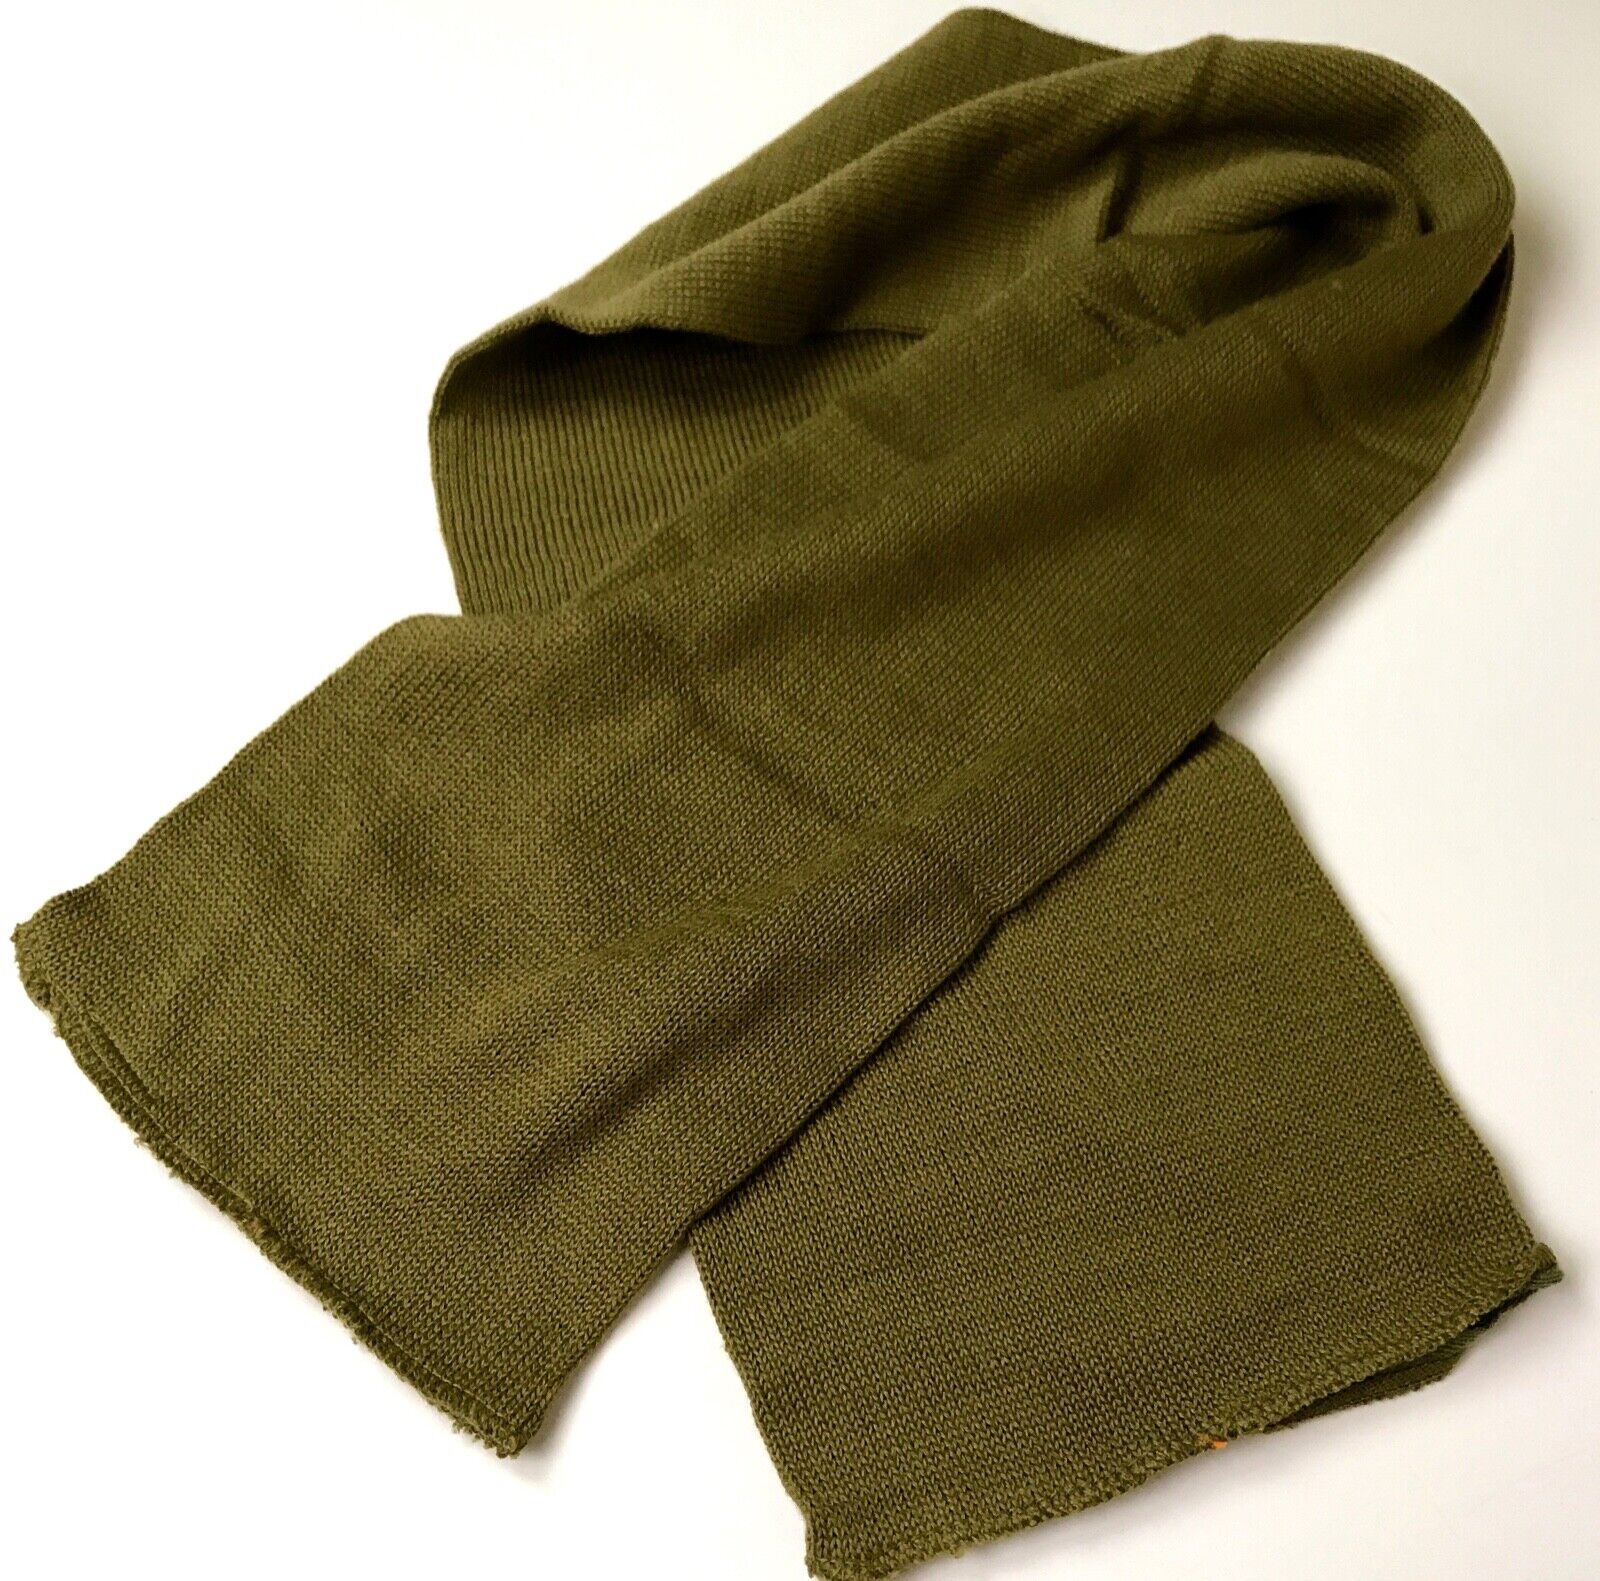  WWII US ARMY PARATROOPER INFANTRY WINTER WOOL UNDER KNIT SCARF